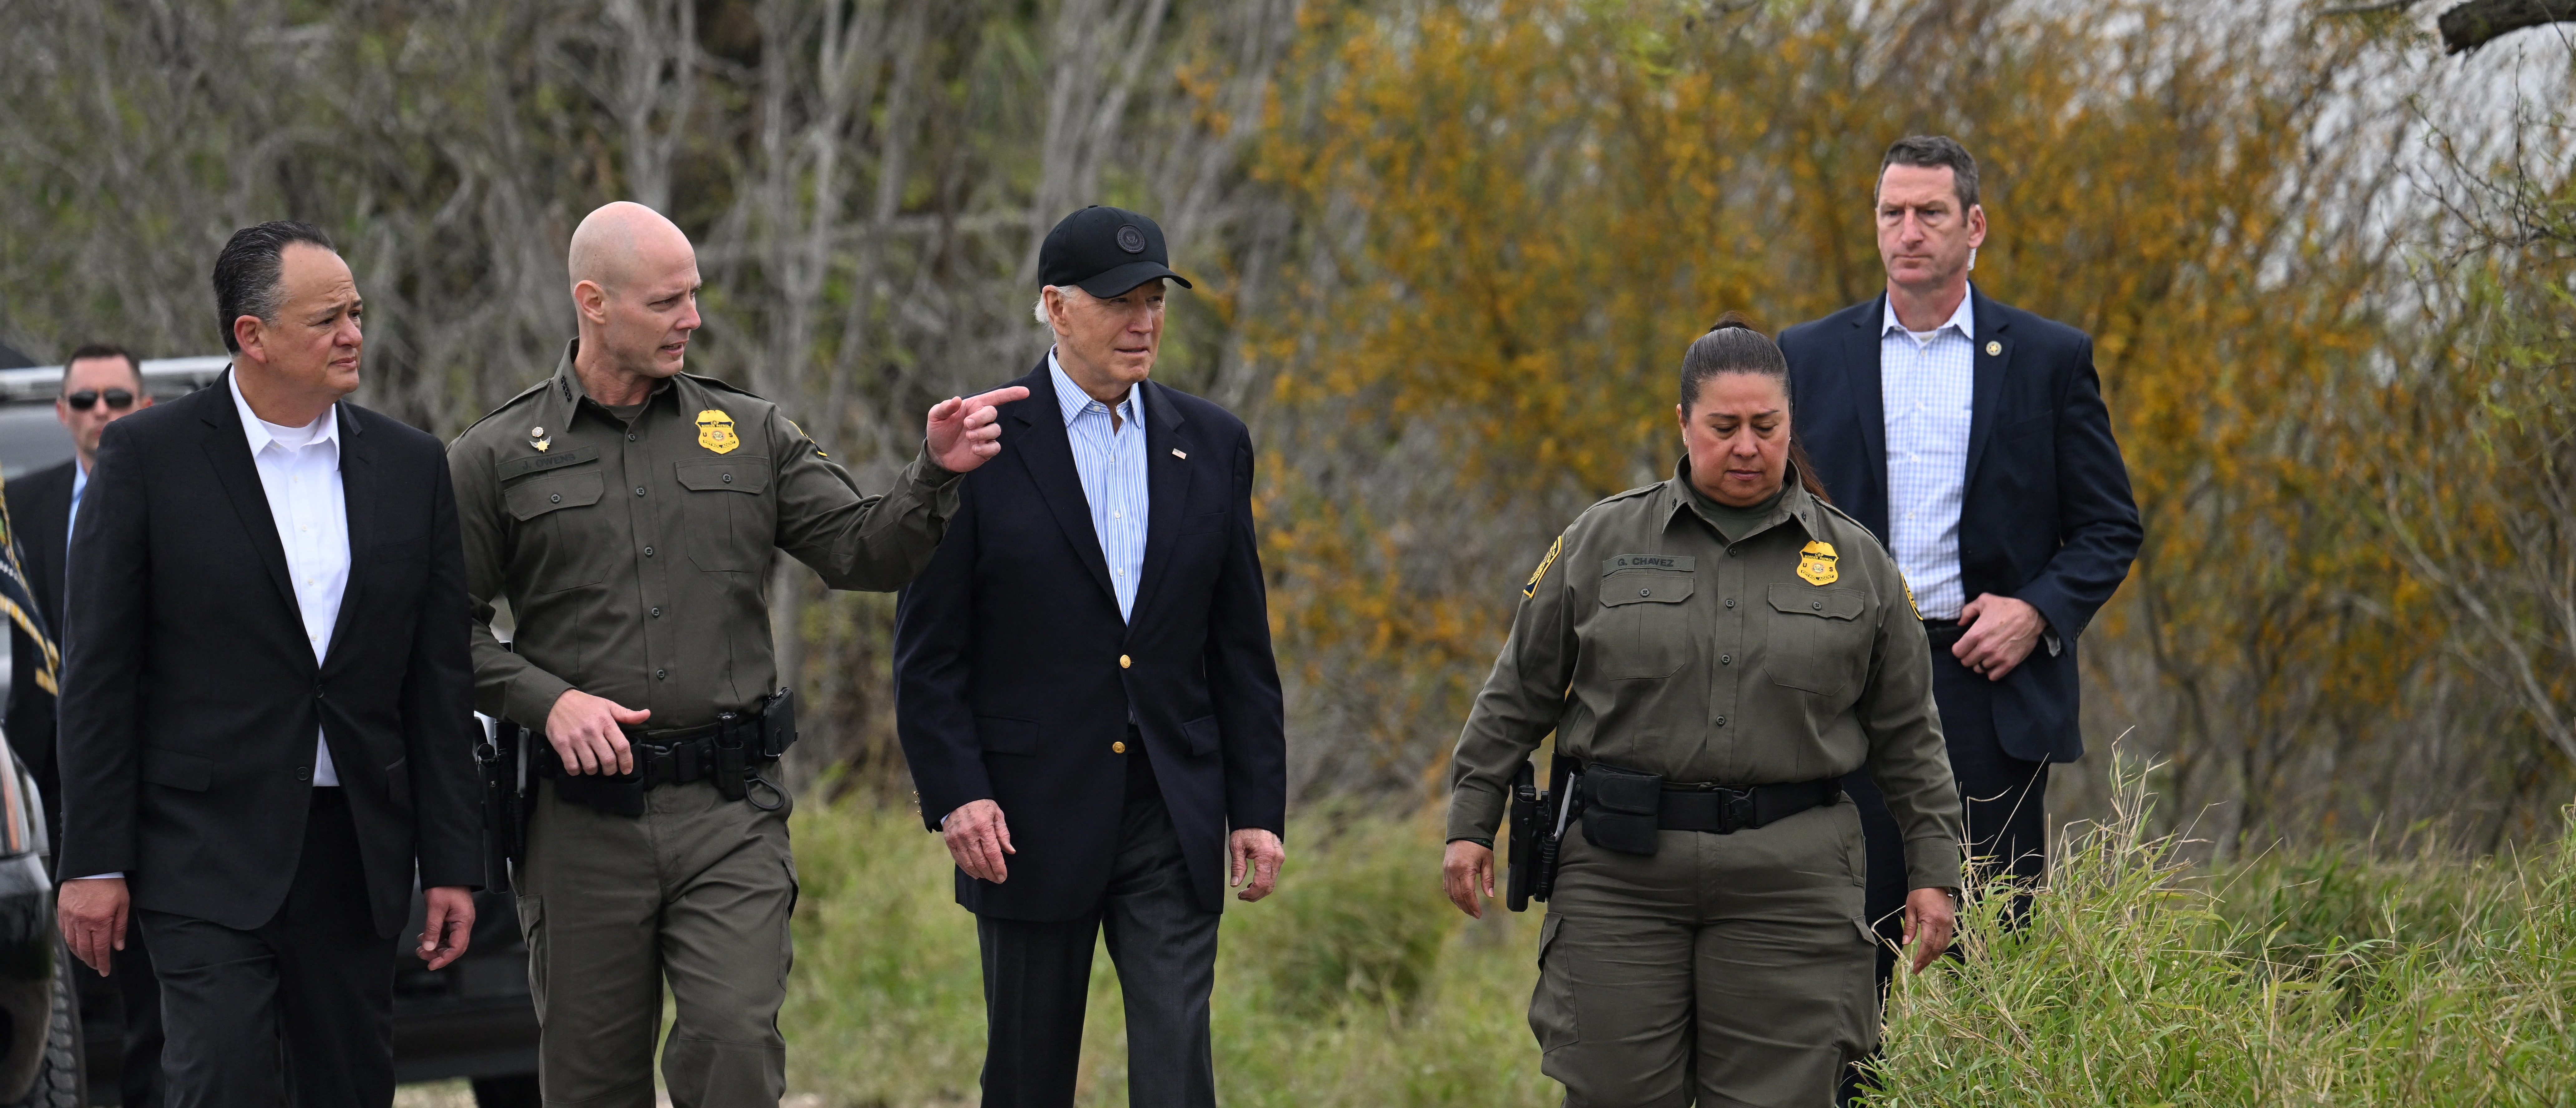 US President Joe Biden listens to Jason Owens (2nd L), Chief of US Border Patrol, as he visits the US-Mexico border in Brownsville, Texas, on February 29, 2024. (Photo by Jim WATSON / AFP) (Photo by JIM WATSON/AFP via Getty Images)